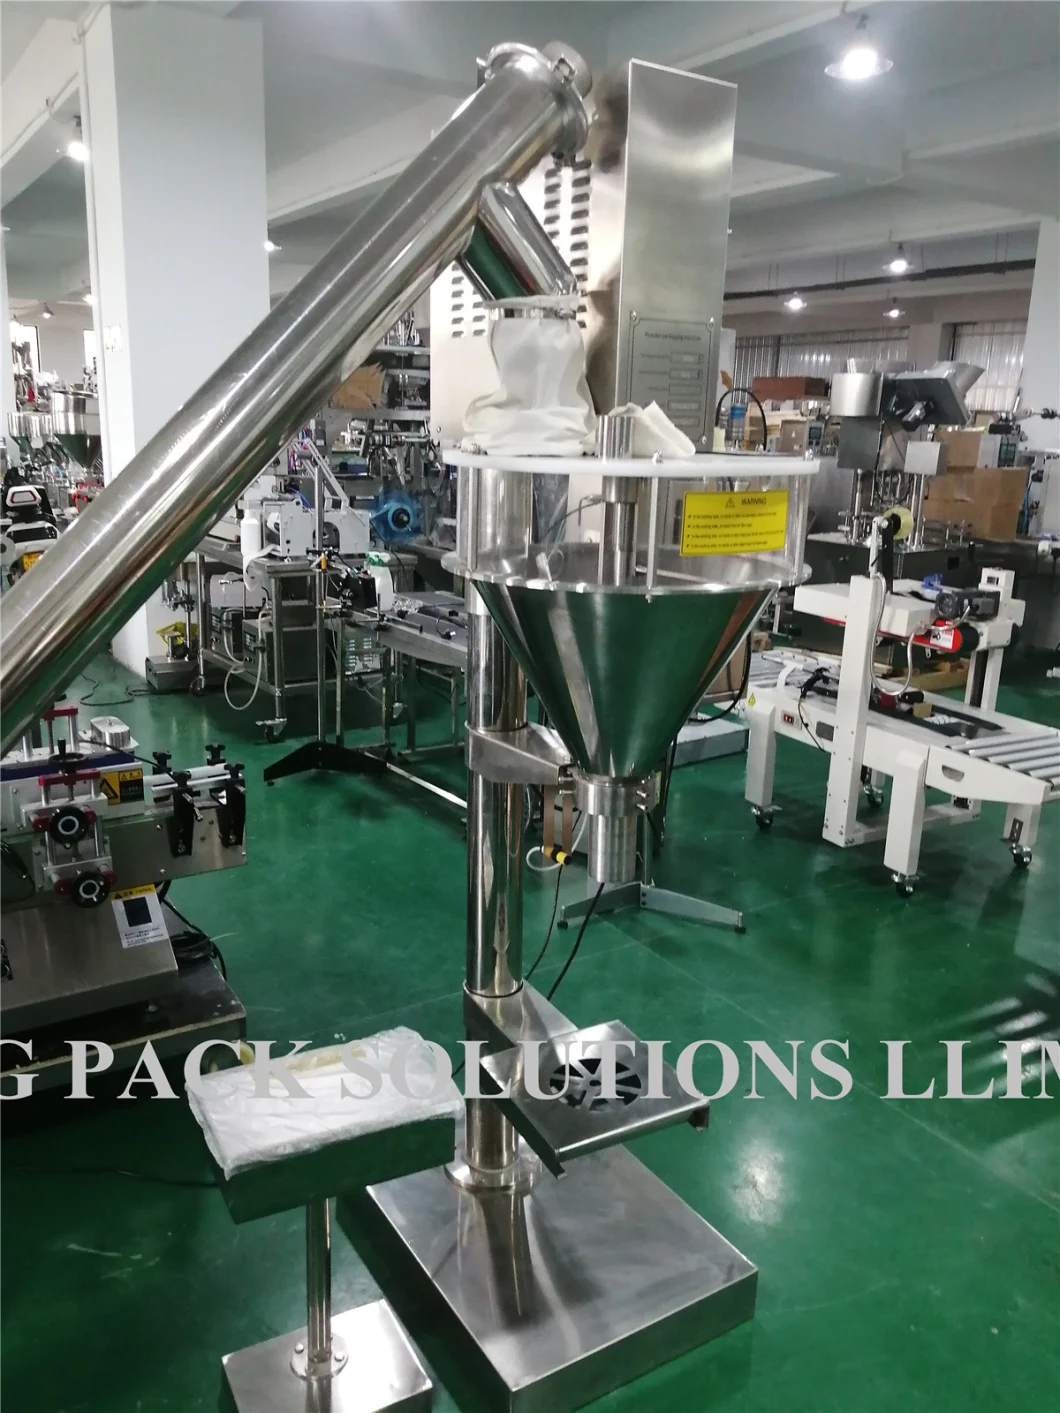 Factory Vertical Automatic Powder Filling Machine Dry Powder Filling Machine Auger Filling Machine